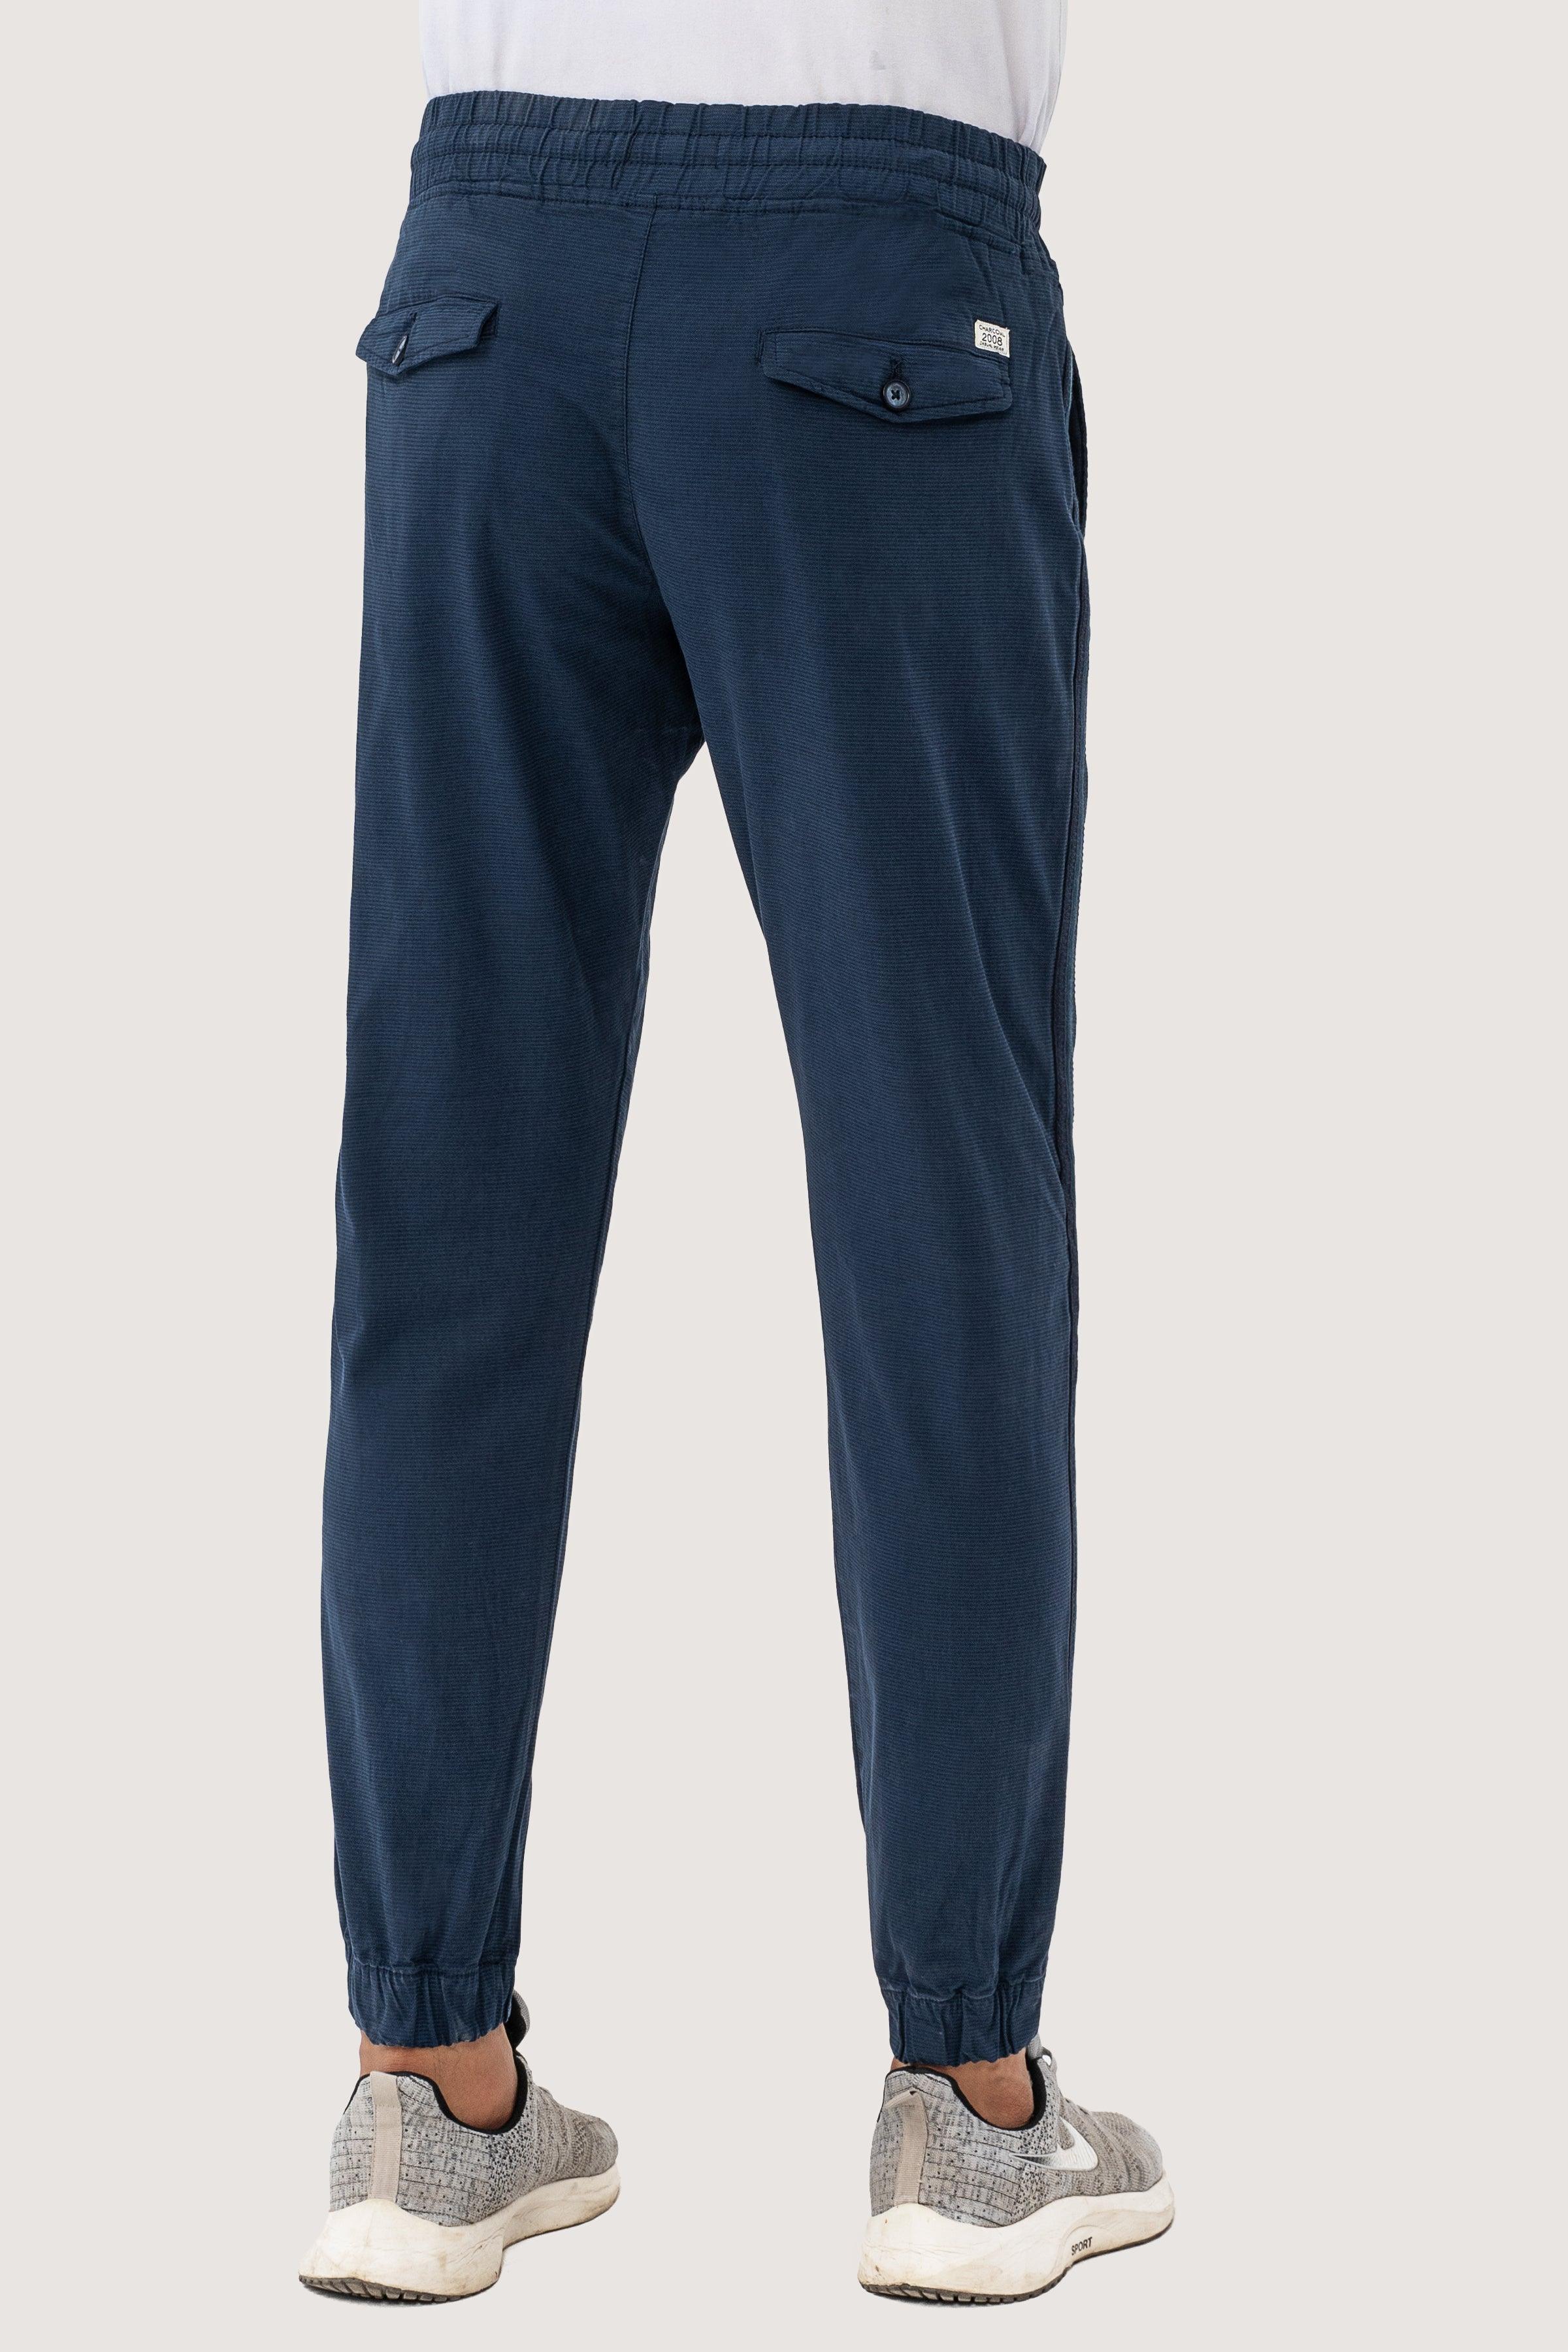 SELF TEXTURED CONTRAST TAPE TROUSER NAVY at Charcoal Clothing